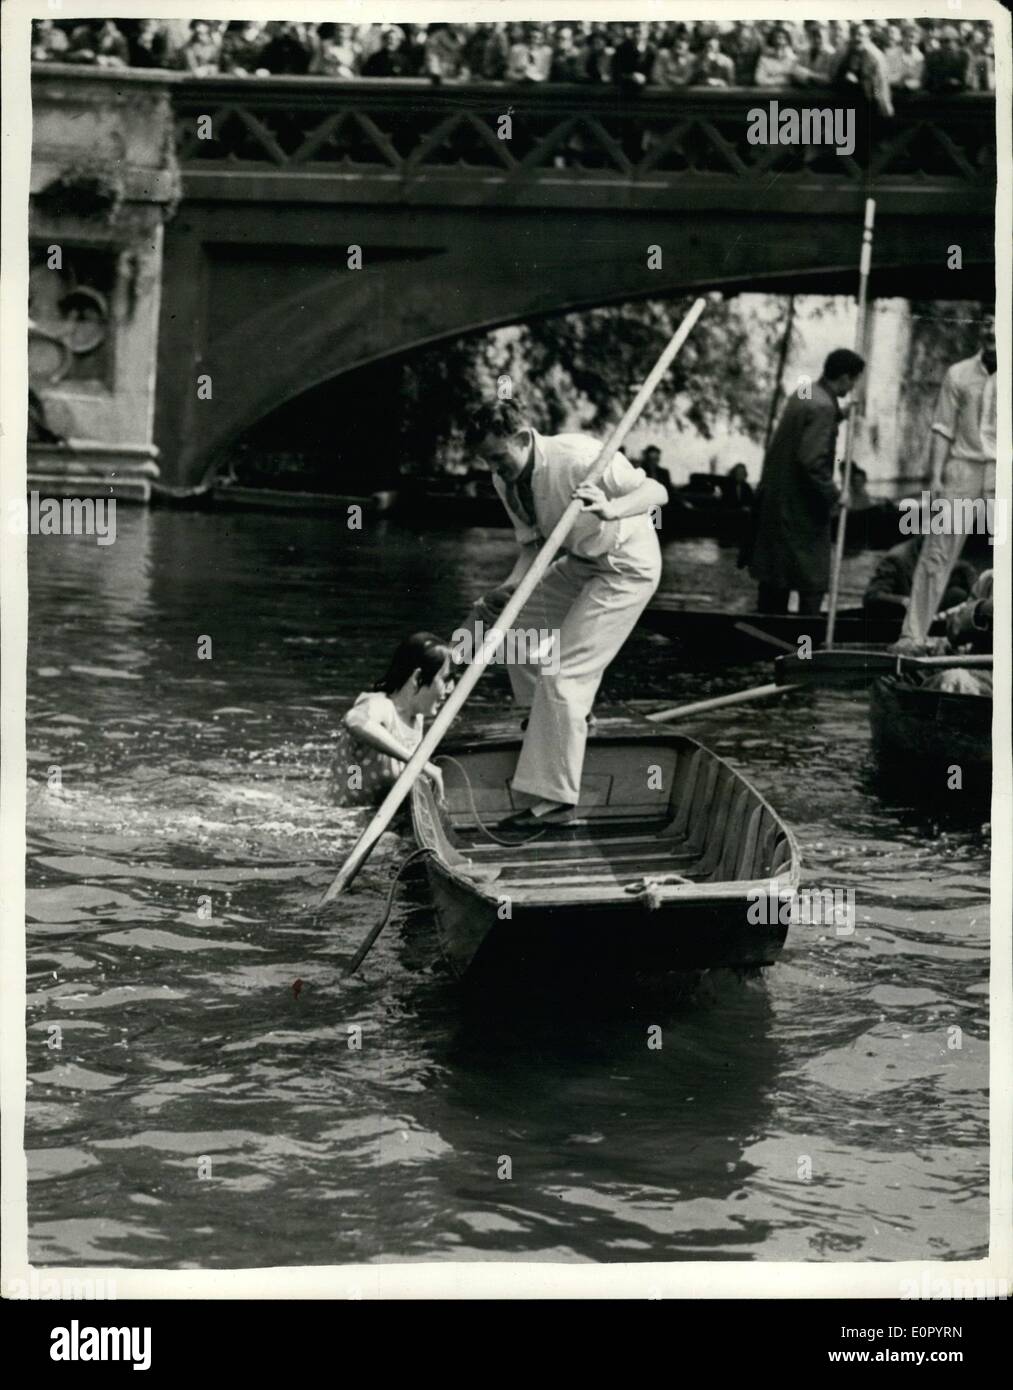 May 05, 1957 - Annual Relay Punt Race... Felicity misses the boat. During the fifth annual relay punt race between the Cambridge University Damper's Club and the Oxford University Club, Felicity Willis, of Newman College, Cambridge, passenger, in the Cambridge punt, and Miss Arline Winter, Oxford's passenger, had to jump into each others punt. Cambridge won for the third year running despite the fact that Felicity once missed the punt altogether and went feet first into the river. Photo shows: Felicity Willis climbs aboard her punt, to make another attempt to jump from one punt to the other. Stock Photo